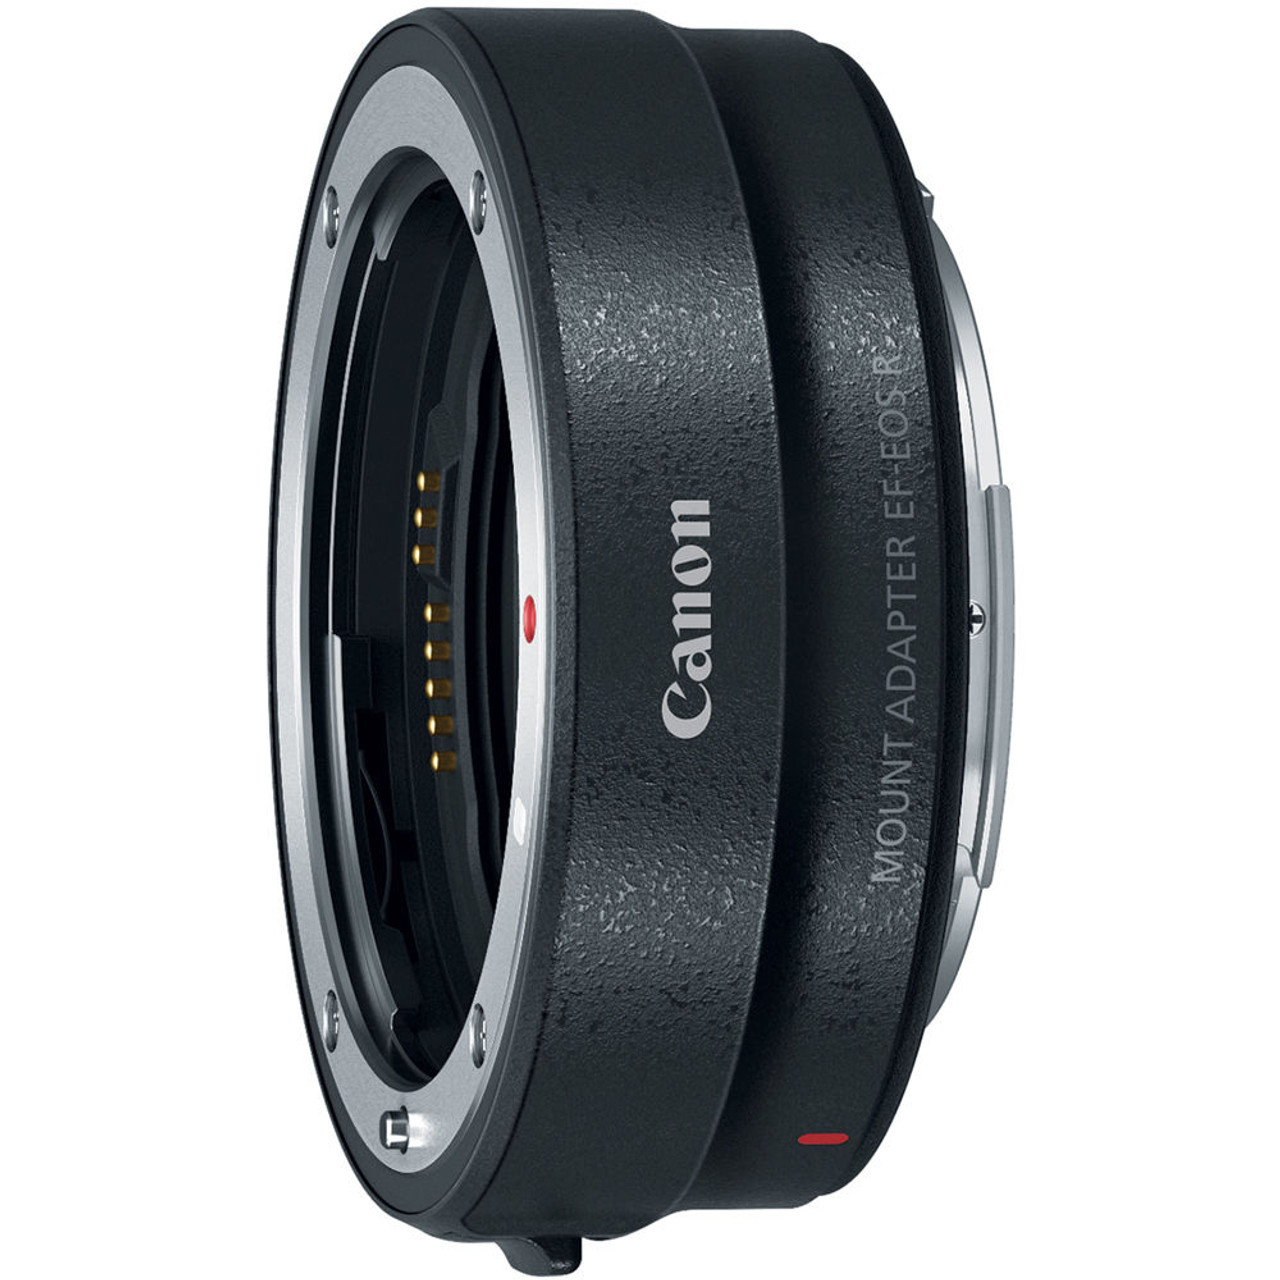 Canon Mount Adapter EF-EOS R 2971C002 B&H Photo Video